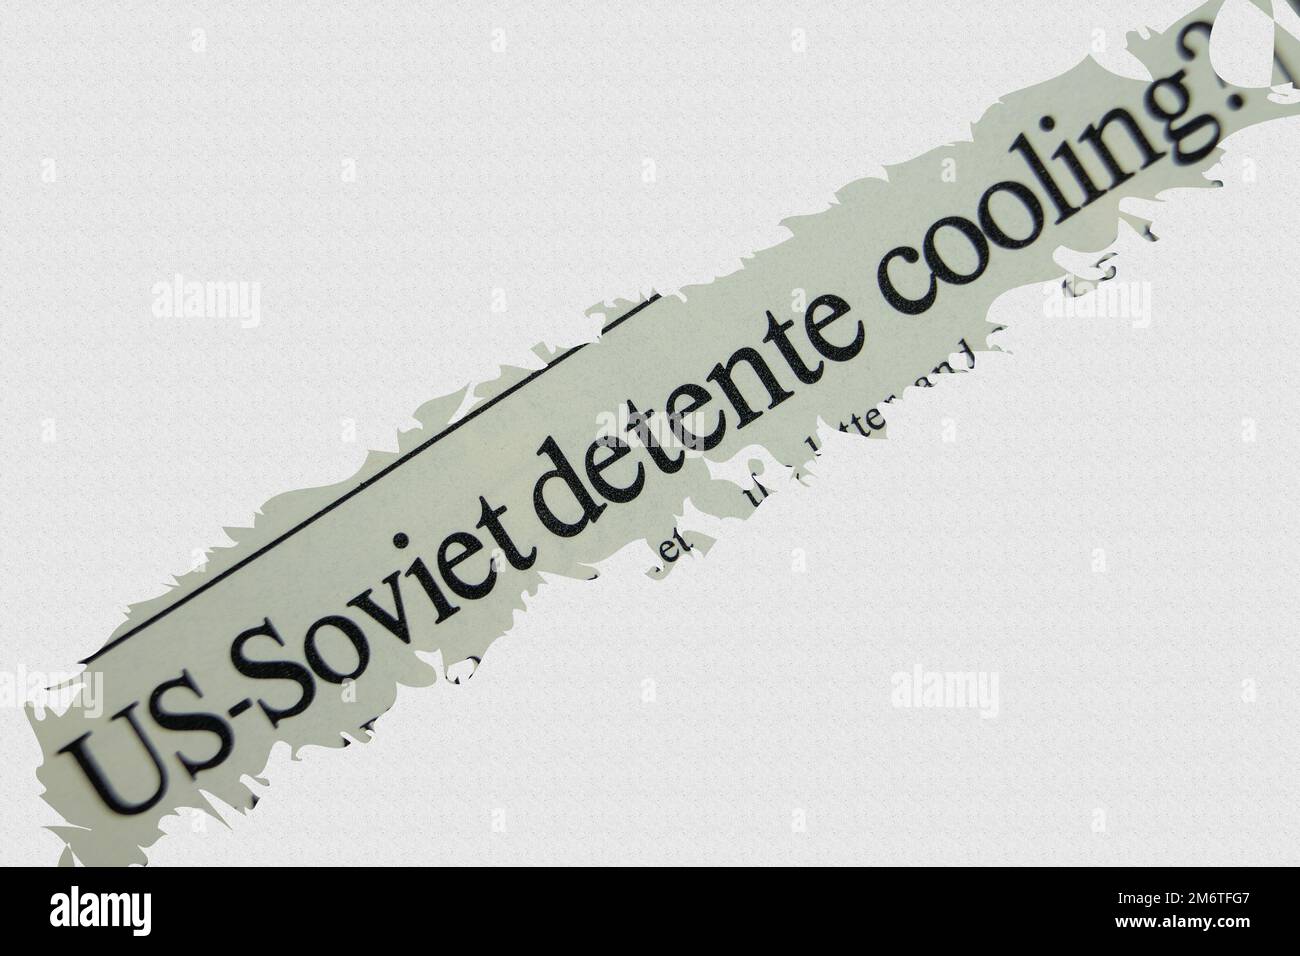 news story from 1975 newspaper headline article title - US-Soviet detente cooling Stock Photo